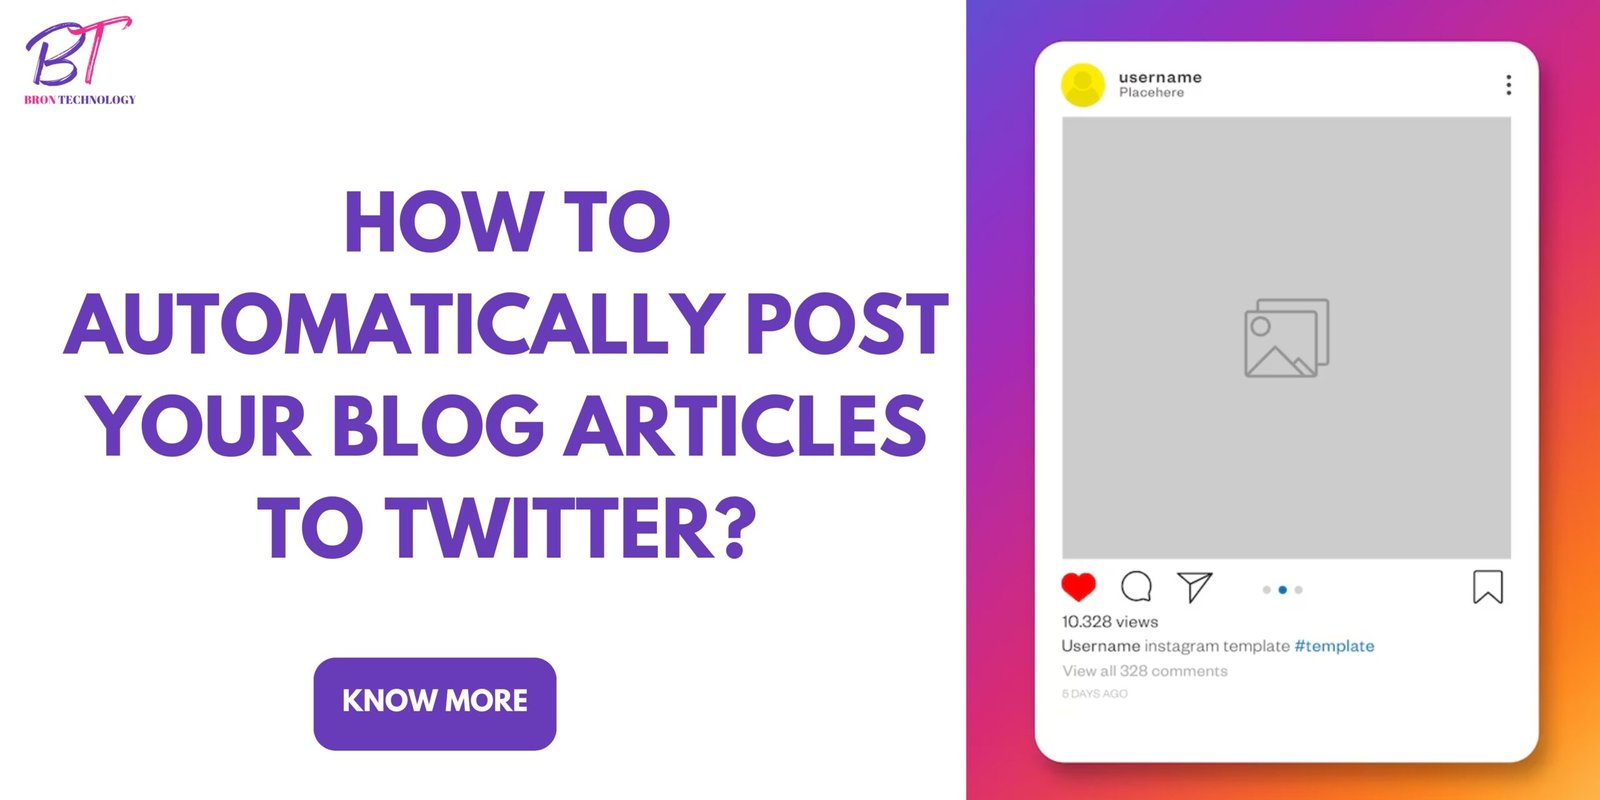 How to Automatically Post Your Blog Articles to Twitter?